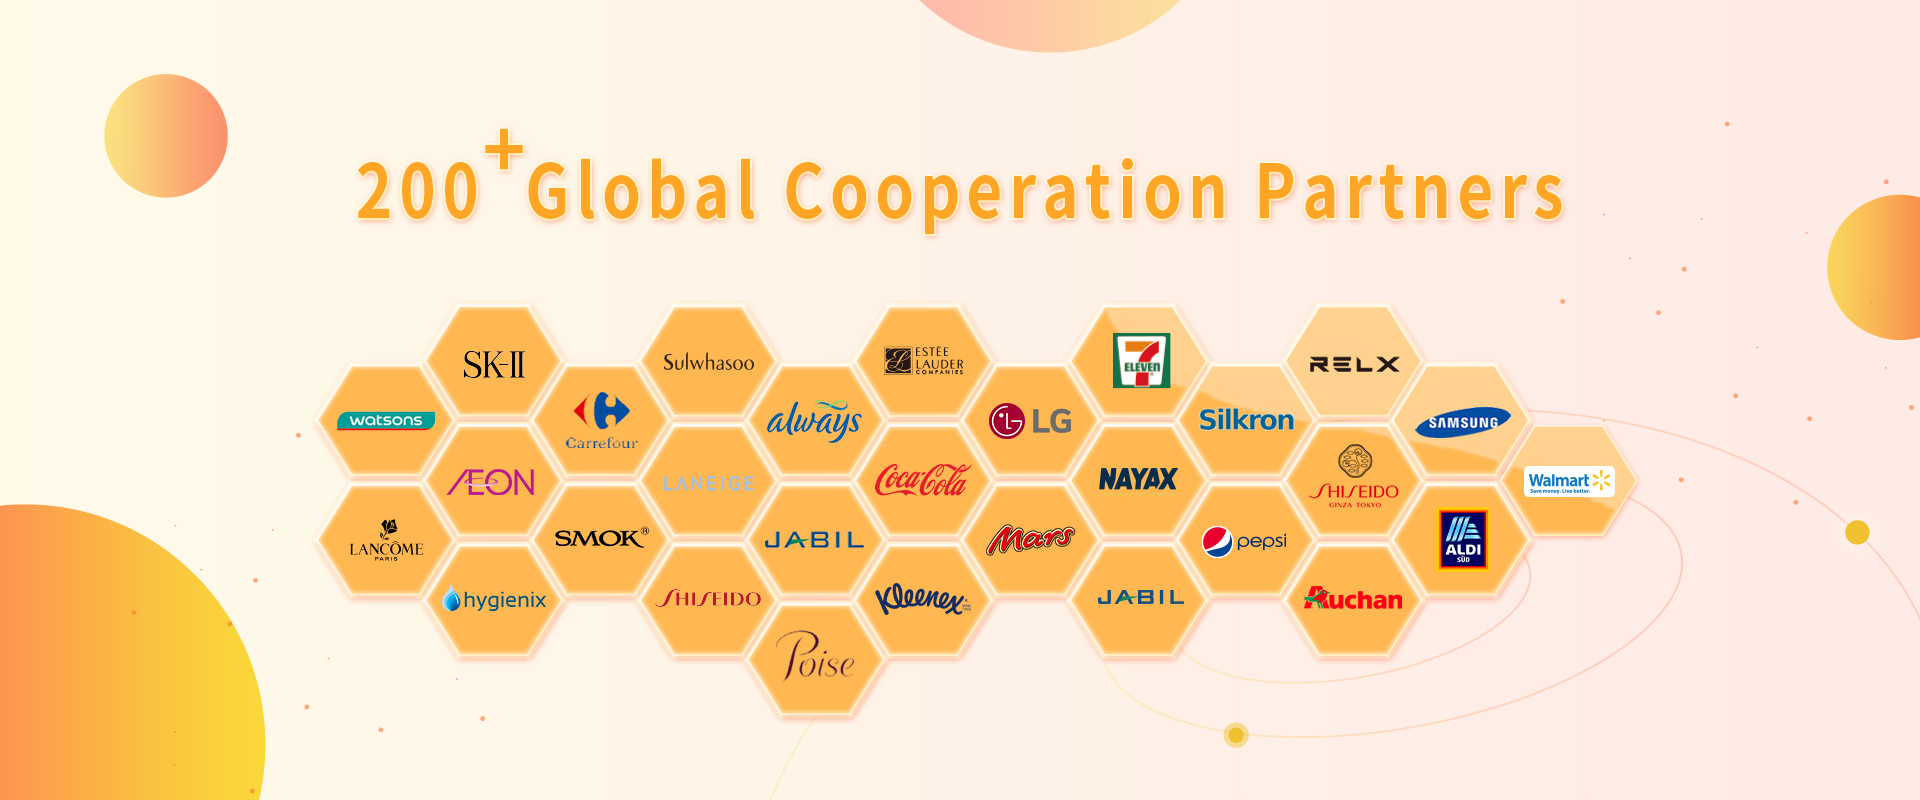 200+ Global Cooperation Partners